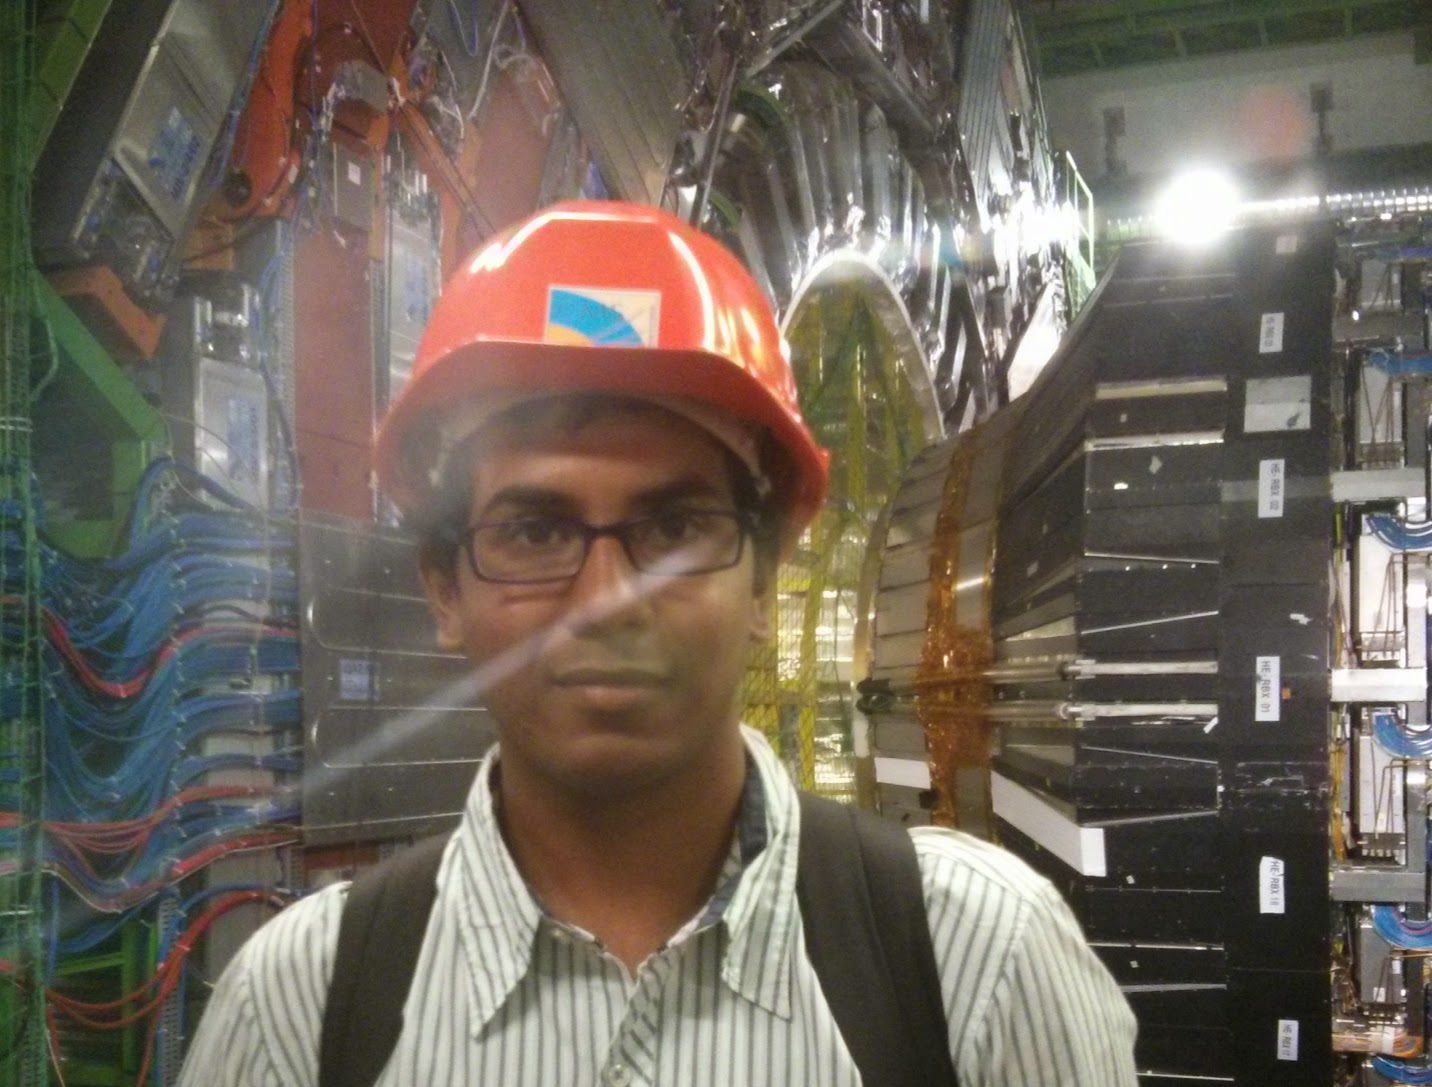 Me standing in front of the Compact Muon Solenoid